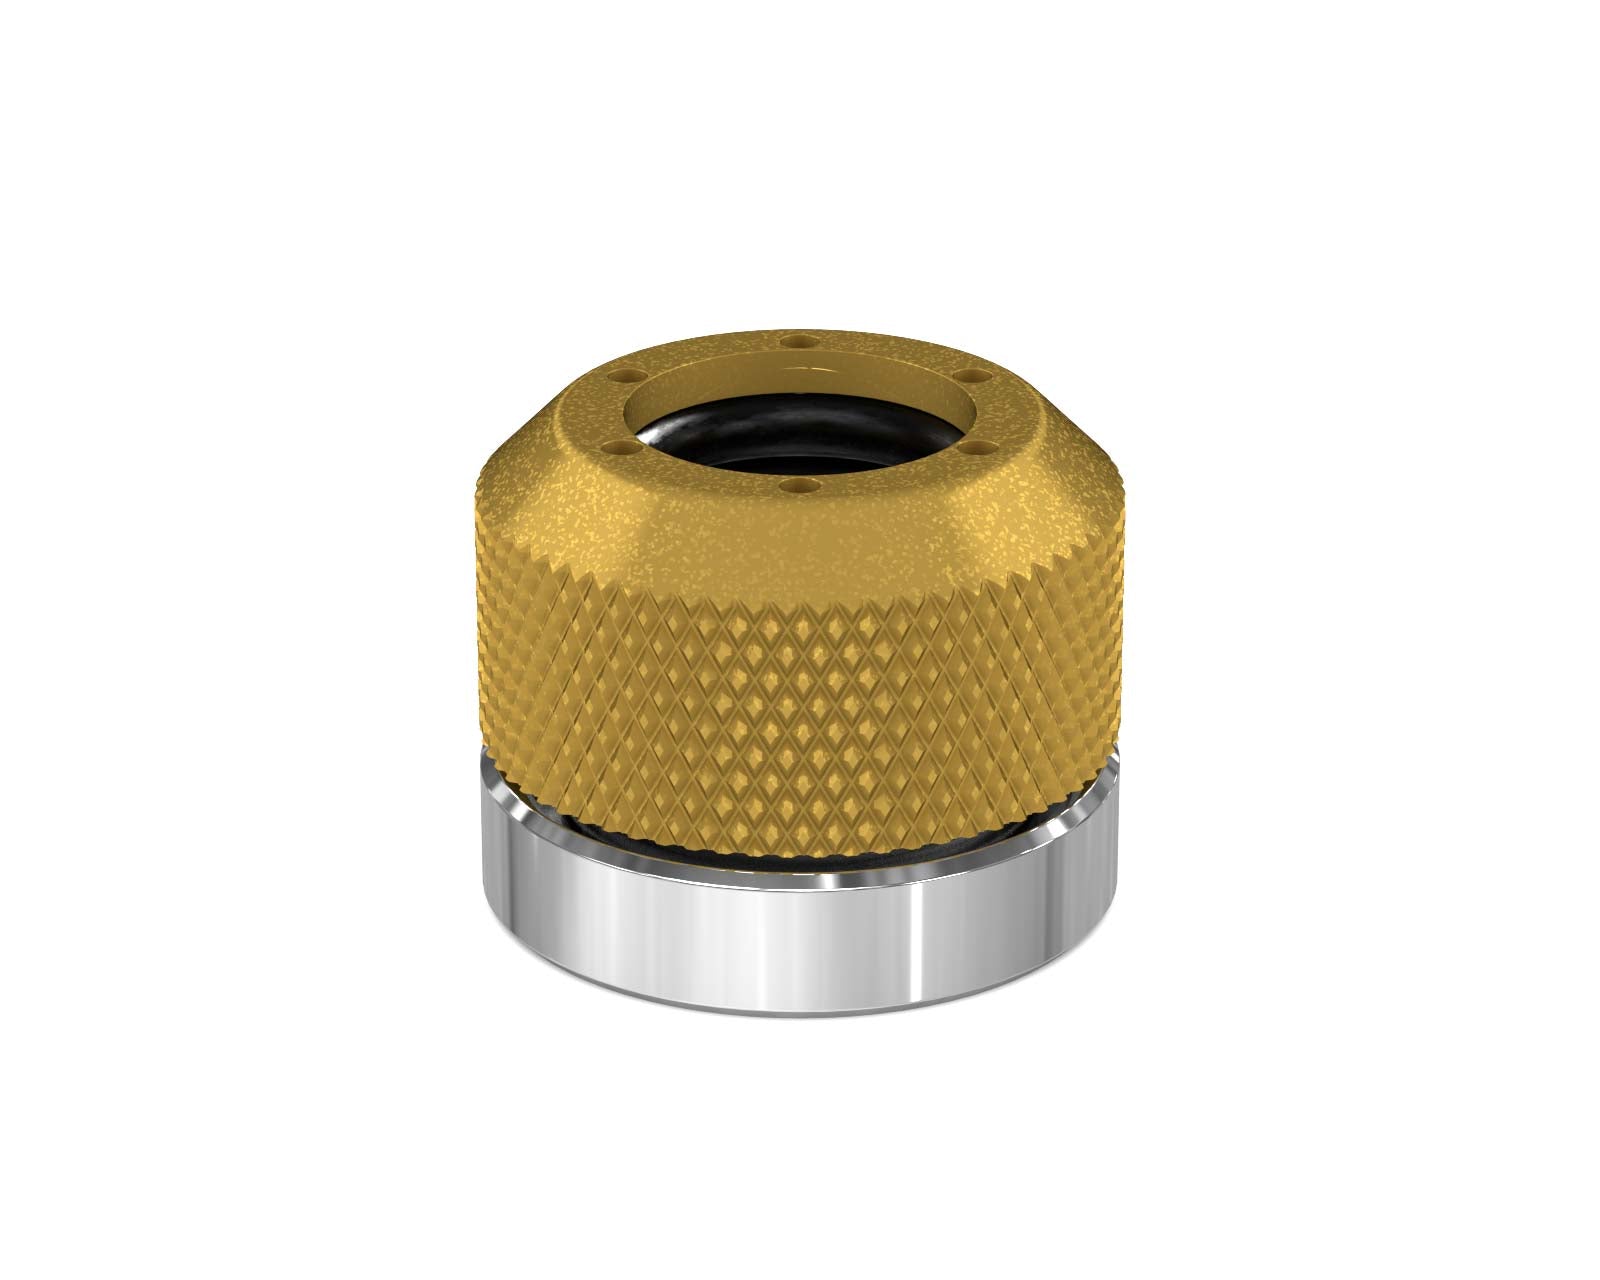 PrimoChill 1/2in. Rigid RevolverSX Series Coupler G 1/4 Fitting - PrimoChill - KEEPING IT COOL Gold